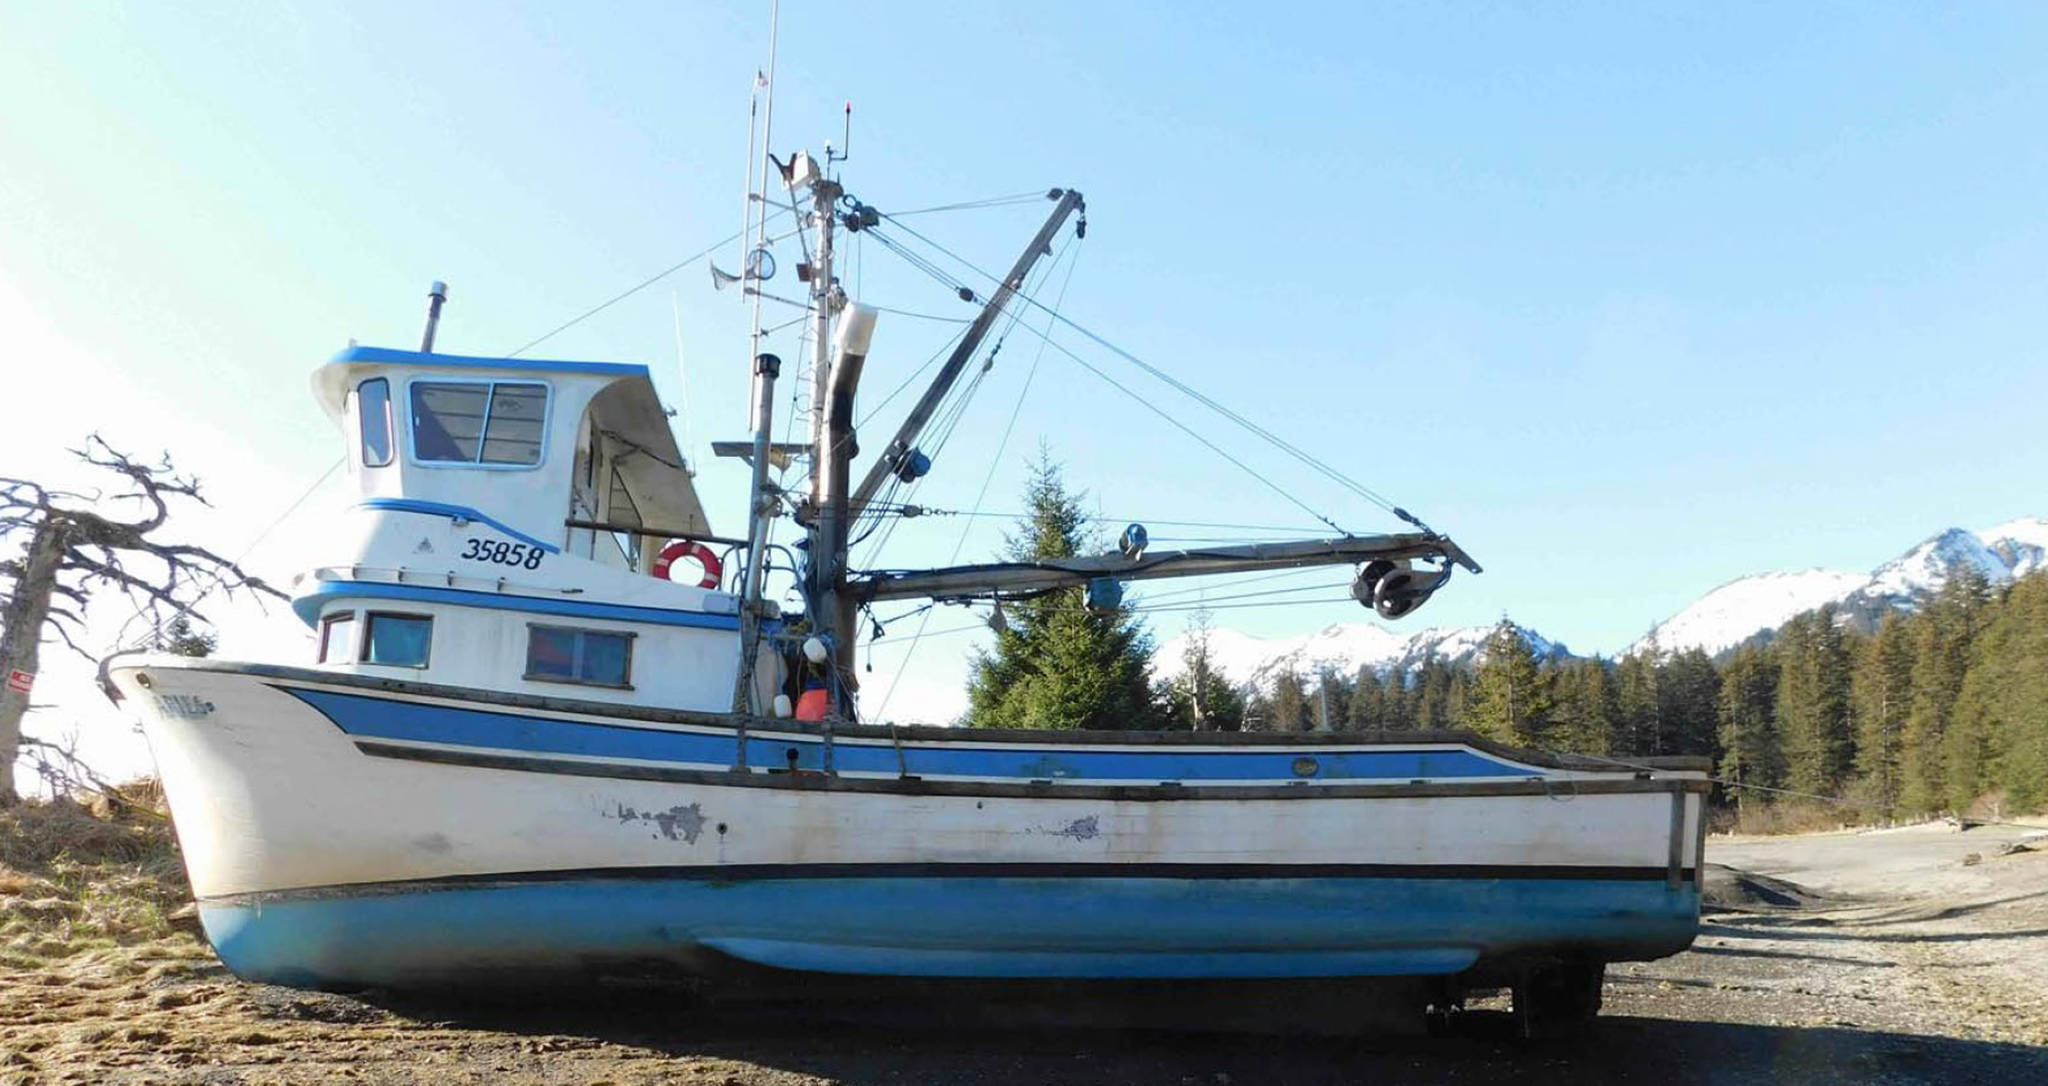 Port Graham resident Ryan Meganack’s fishing vessel the F/V Aries, which he used in 2016 to help fake his own death in order to avoid appearing in Anchorage court for a 2015 sexual assault case. (Photo courtesy U.S. Attorney’s Office, Alaska District)